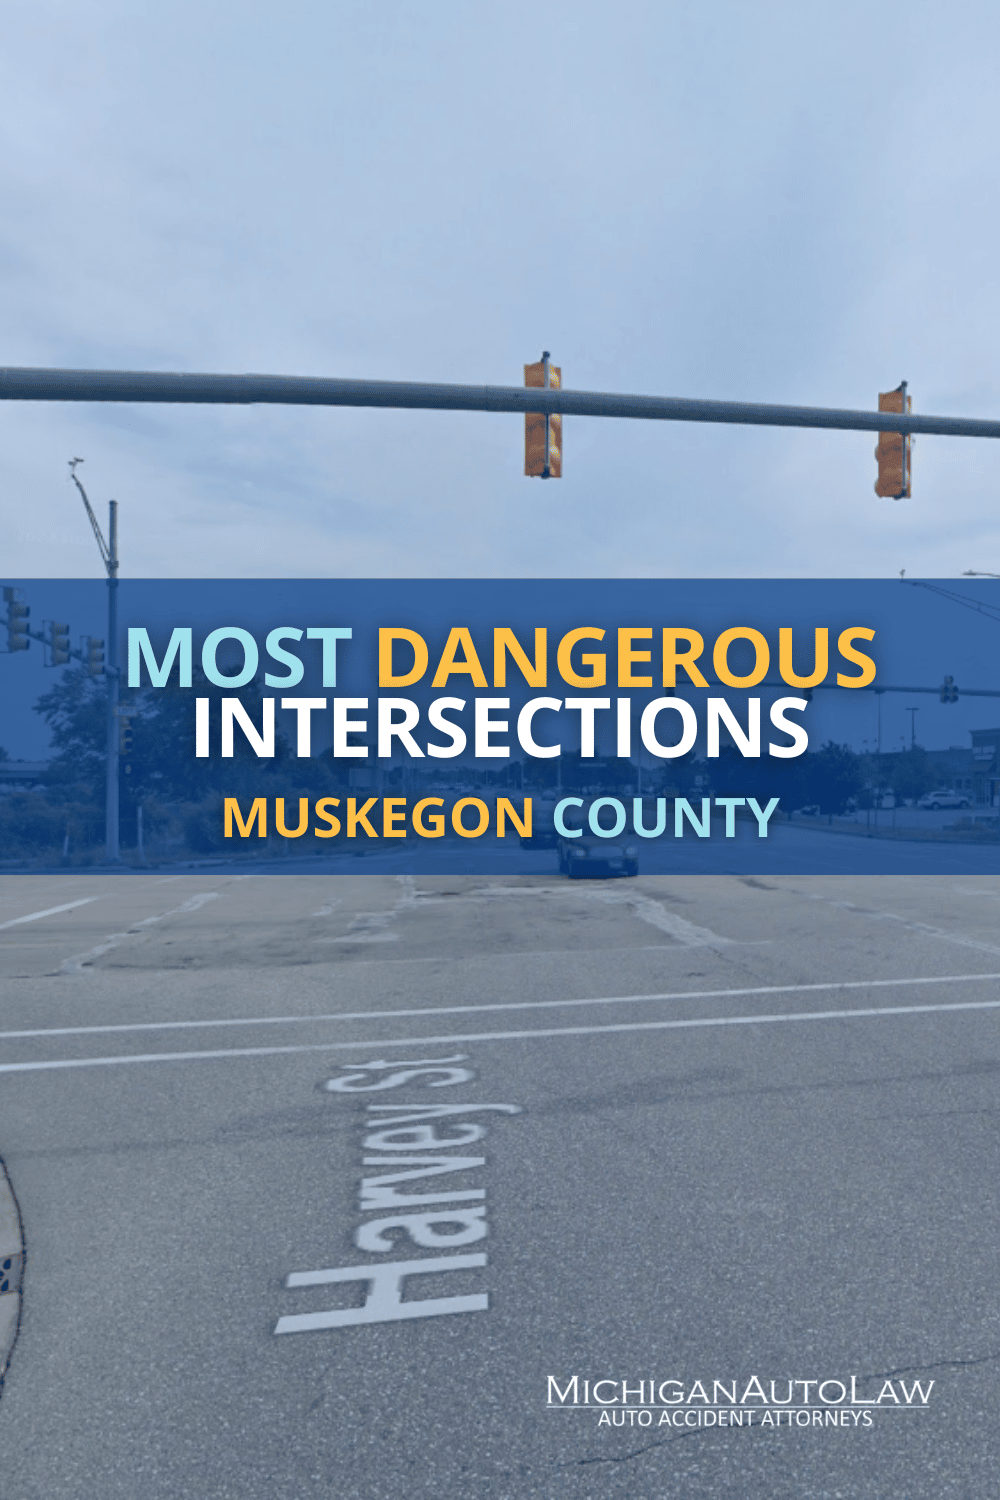 Muskegon County’s Most Dangerous Intersections in 2021